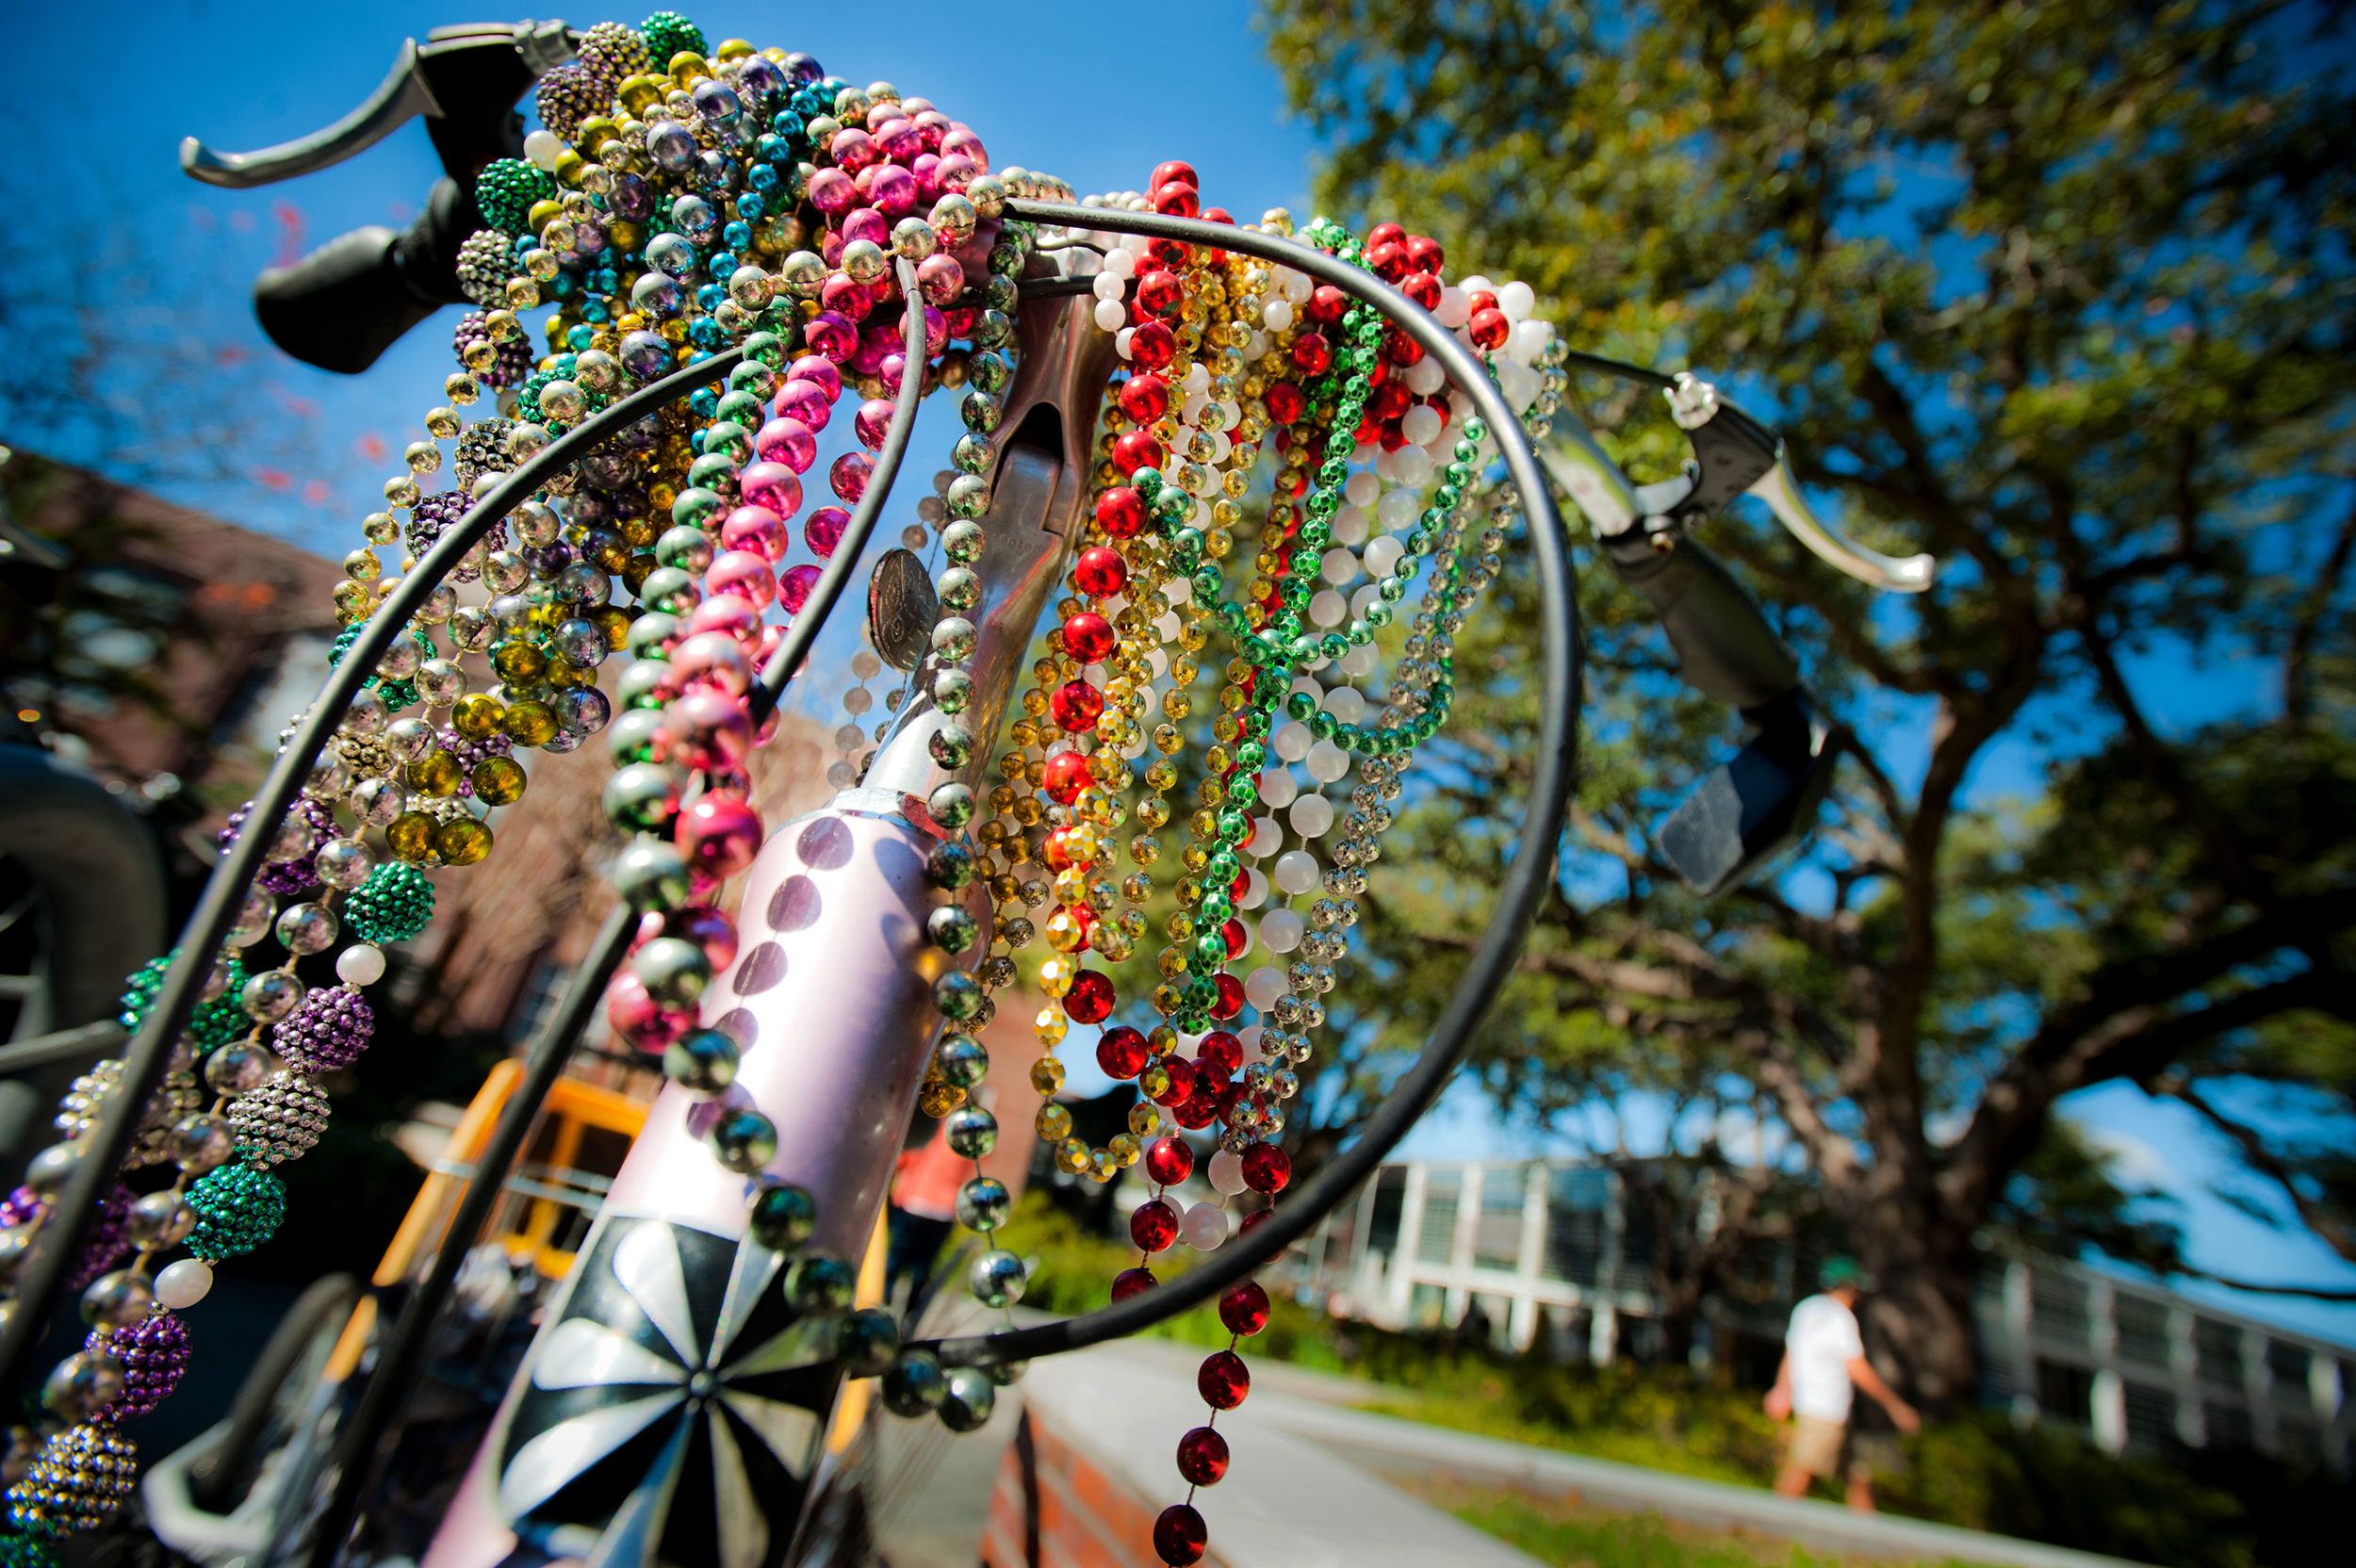 Mardi Gras beads dangling off front bicycle handle.